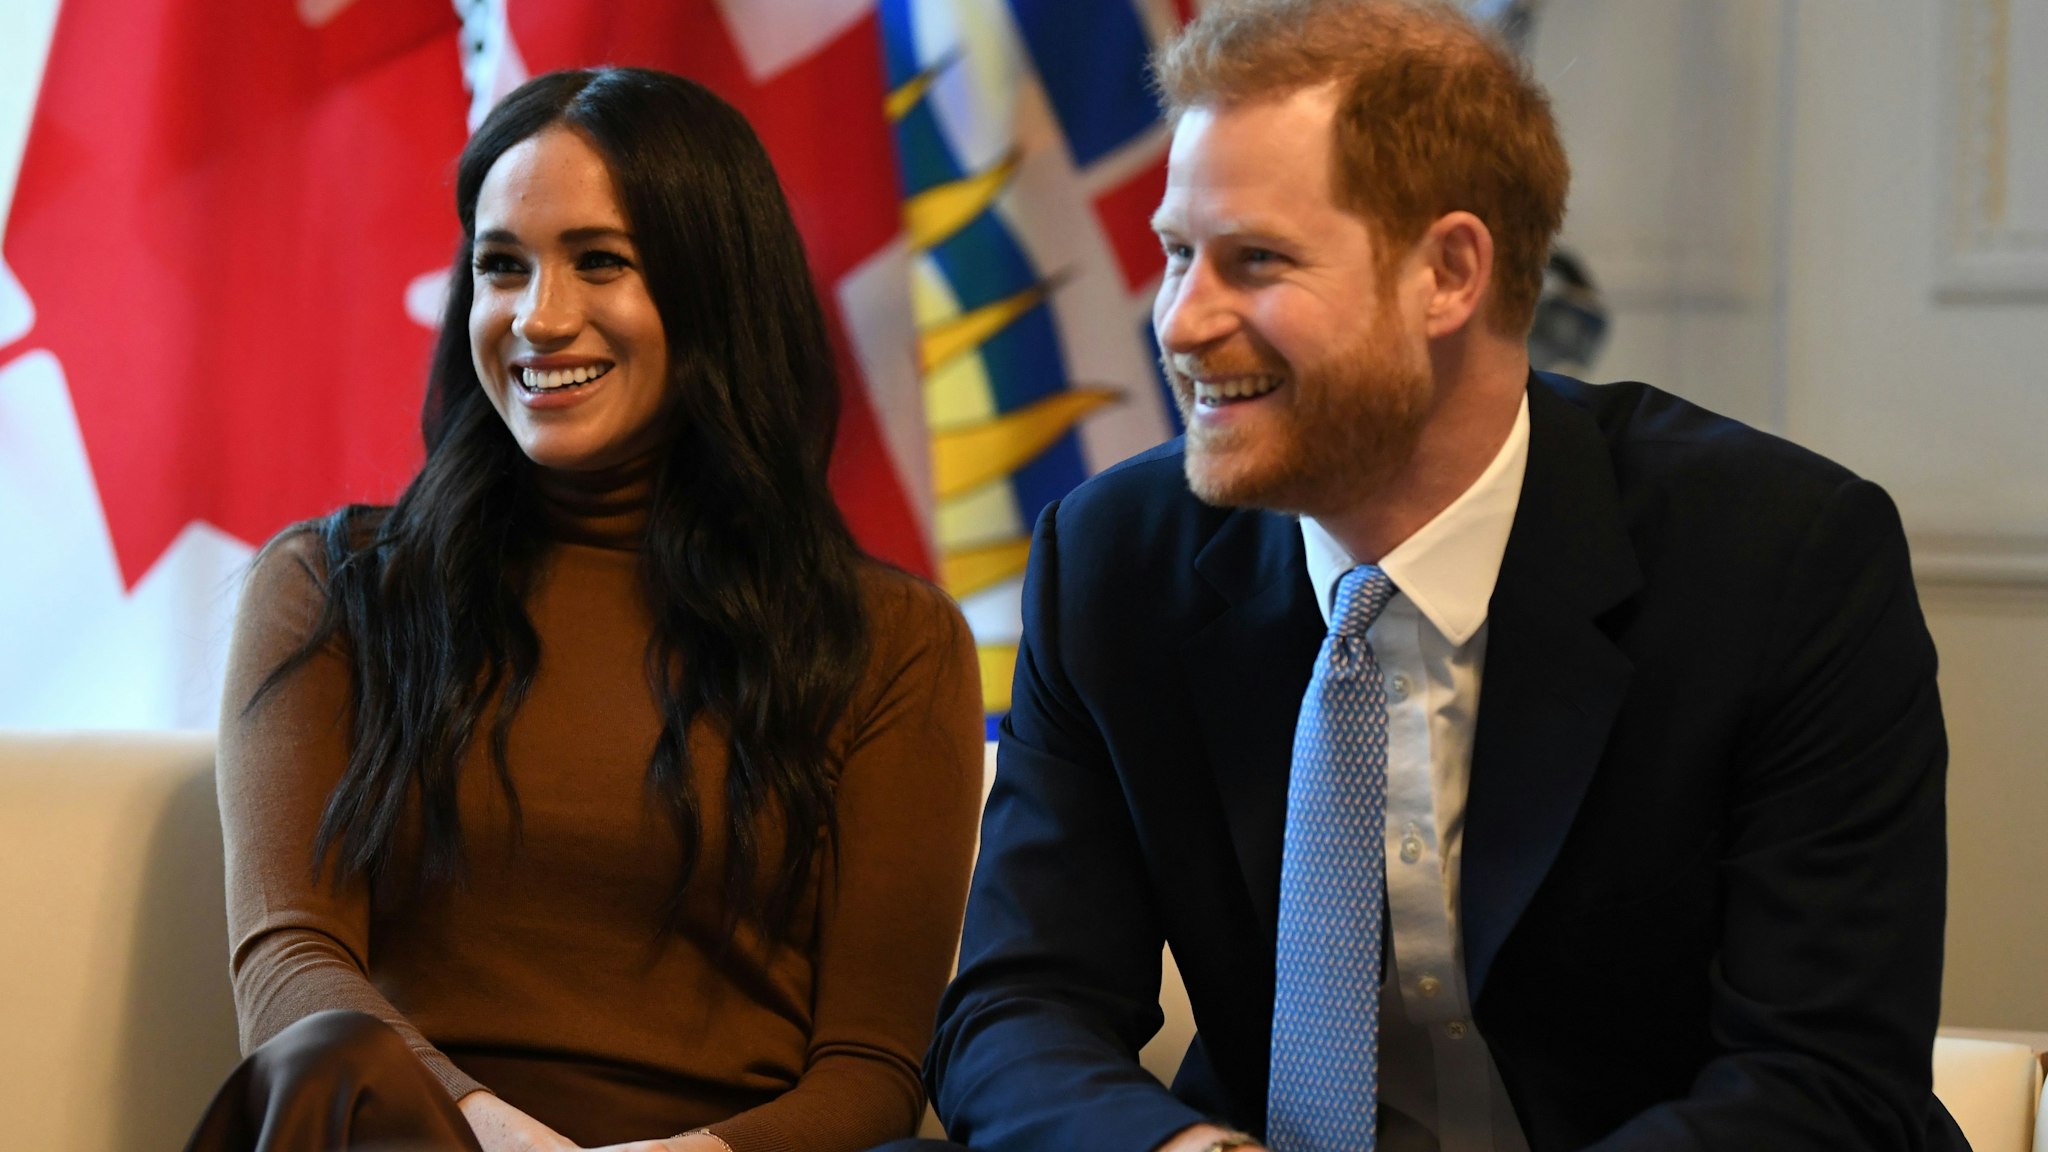 Britain's Prince Harry, Duke of Sussex and Meghan, Duchess of Sussex react during their visit to Canada House in thanks for the warm Canadian hospitality and support they received during their recent stay in Canada, in London on January 7, 2020. (Photo by DANIEL LEAL-OLIVAS / POOL / AFP) (Photo by DANIEL LEAL-OLIVAS/POOL/AFP via Getty Images)